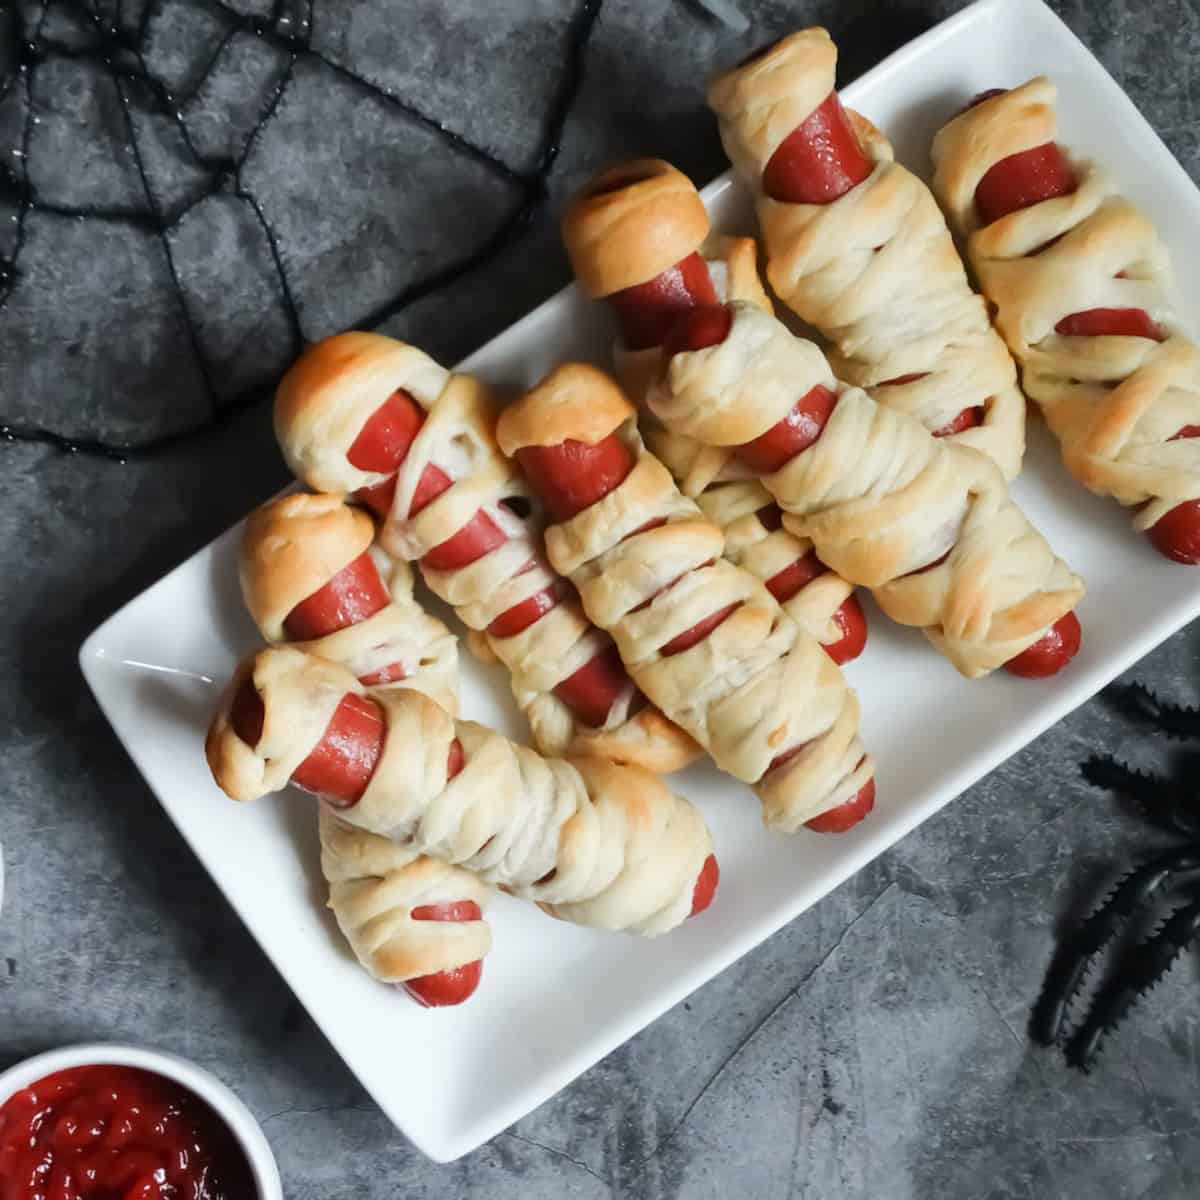 mummy hot dogs on a plate